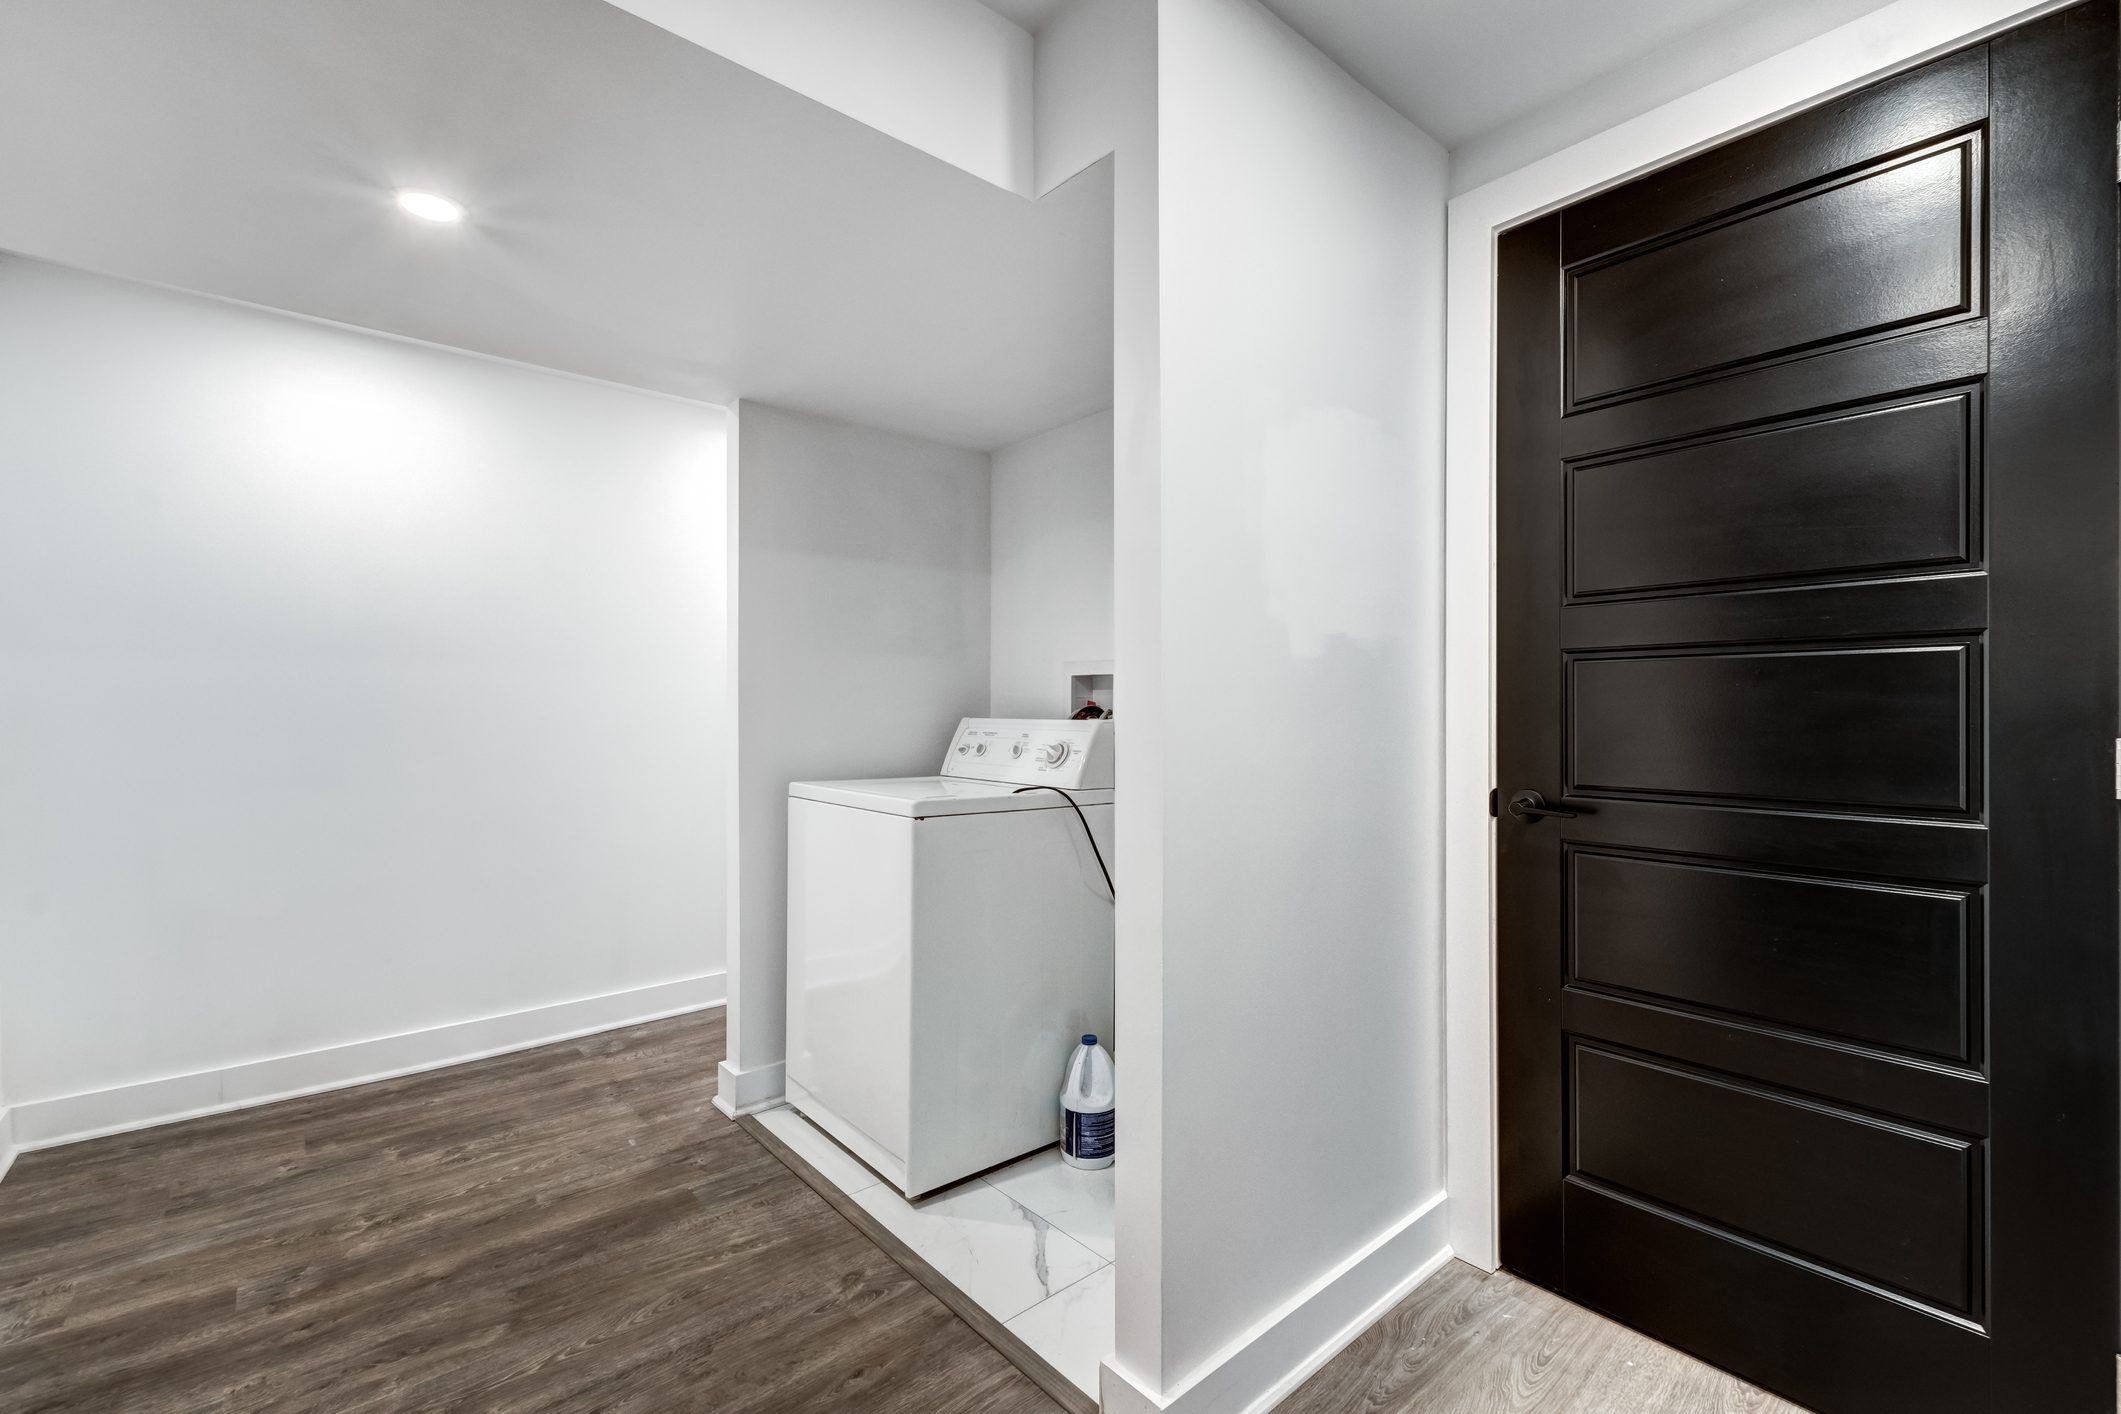 a washing machine in a refinished basement with bright white walls and a wood floor